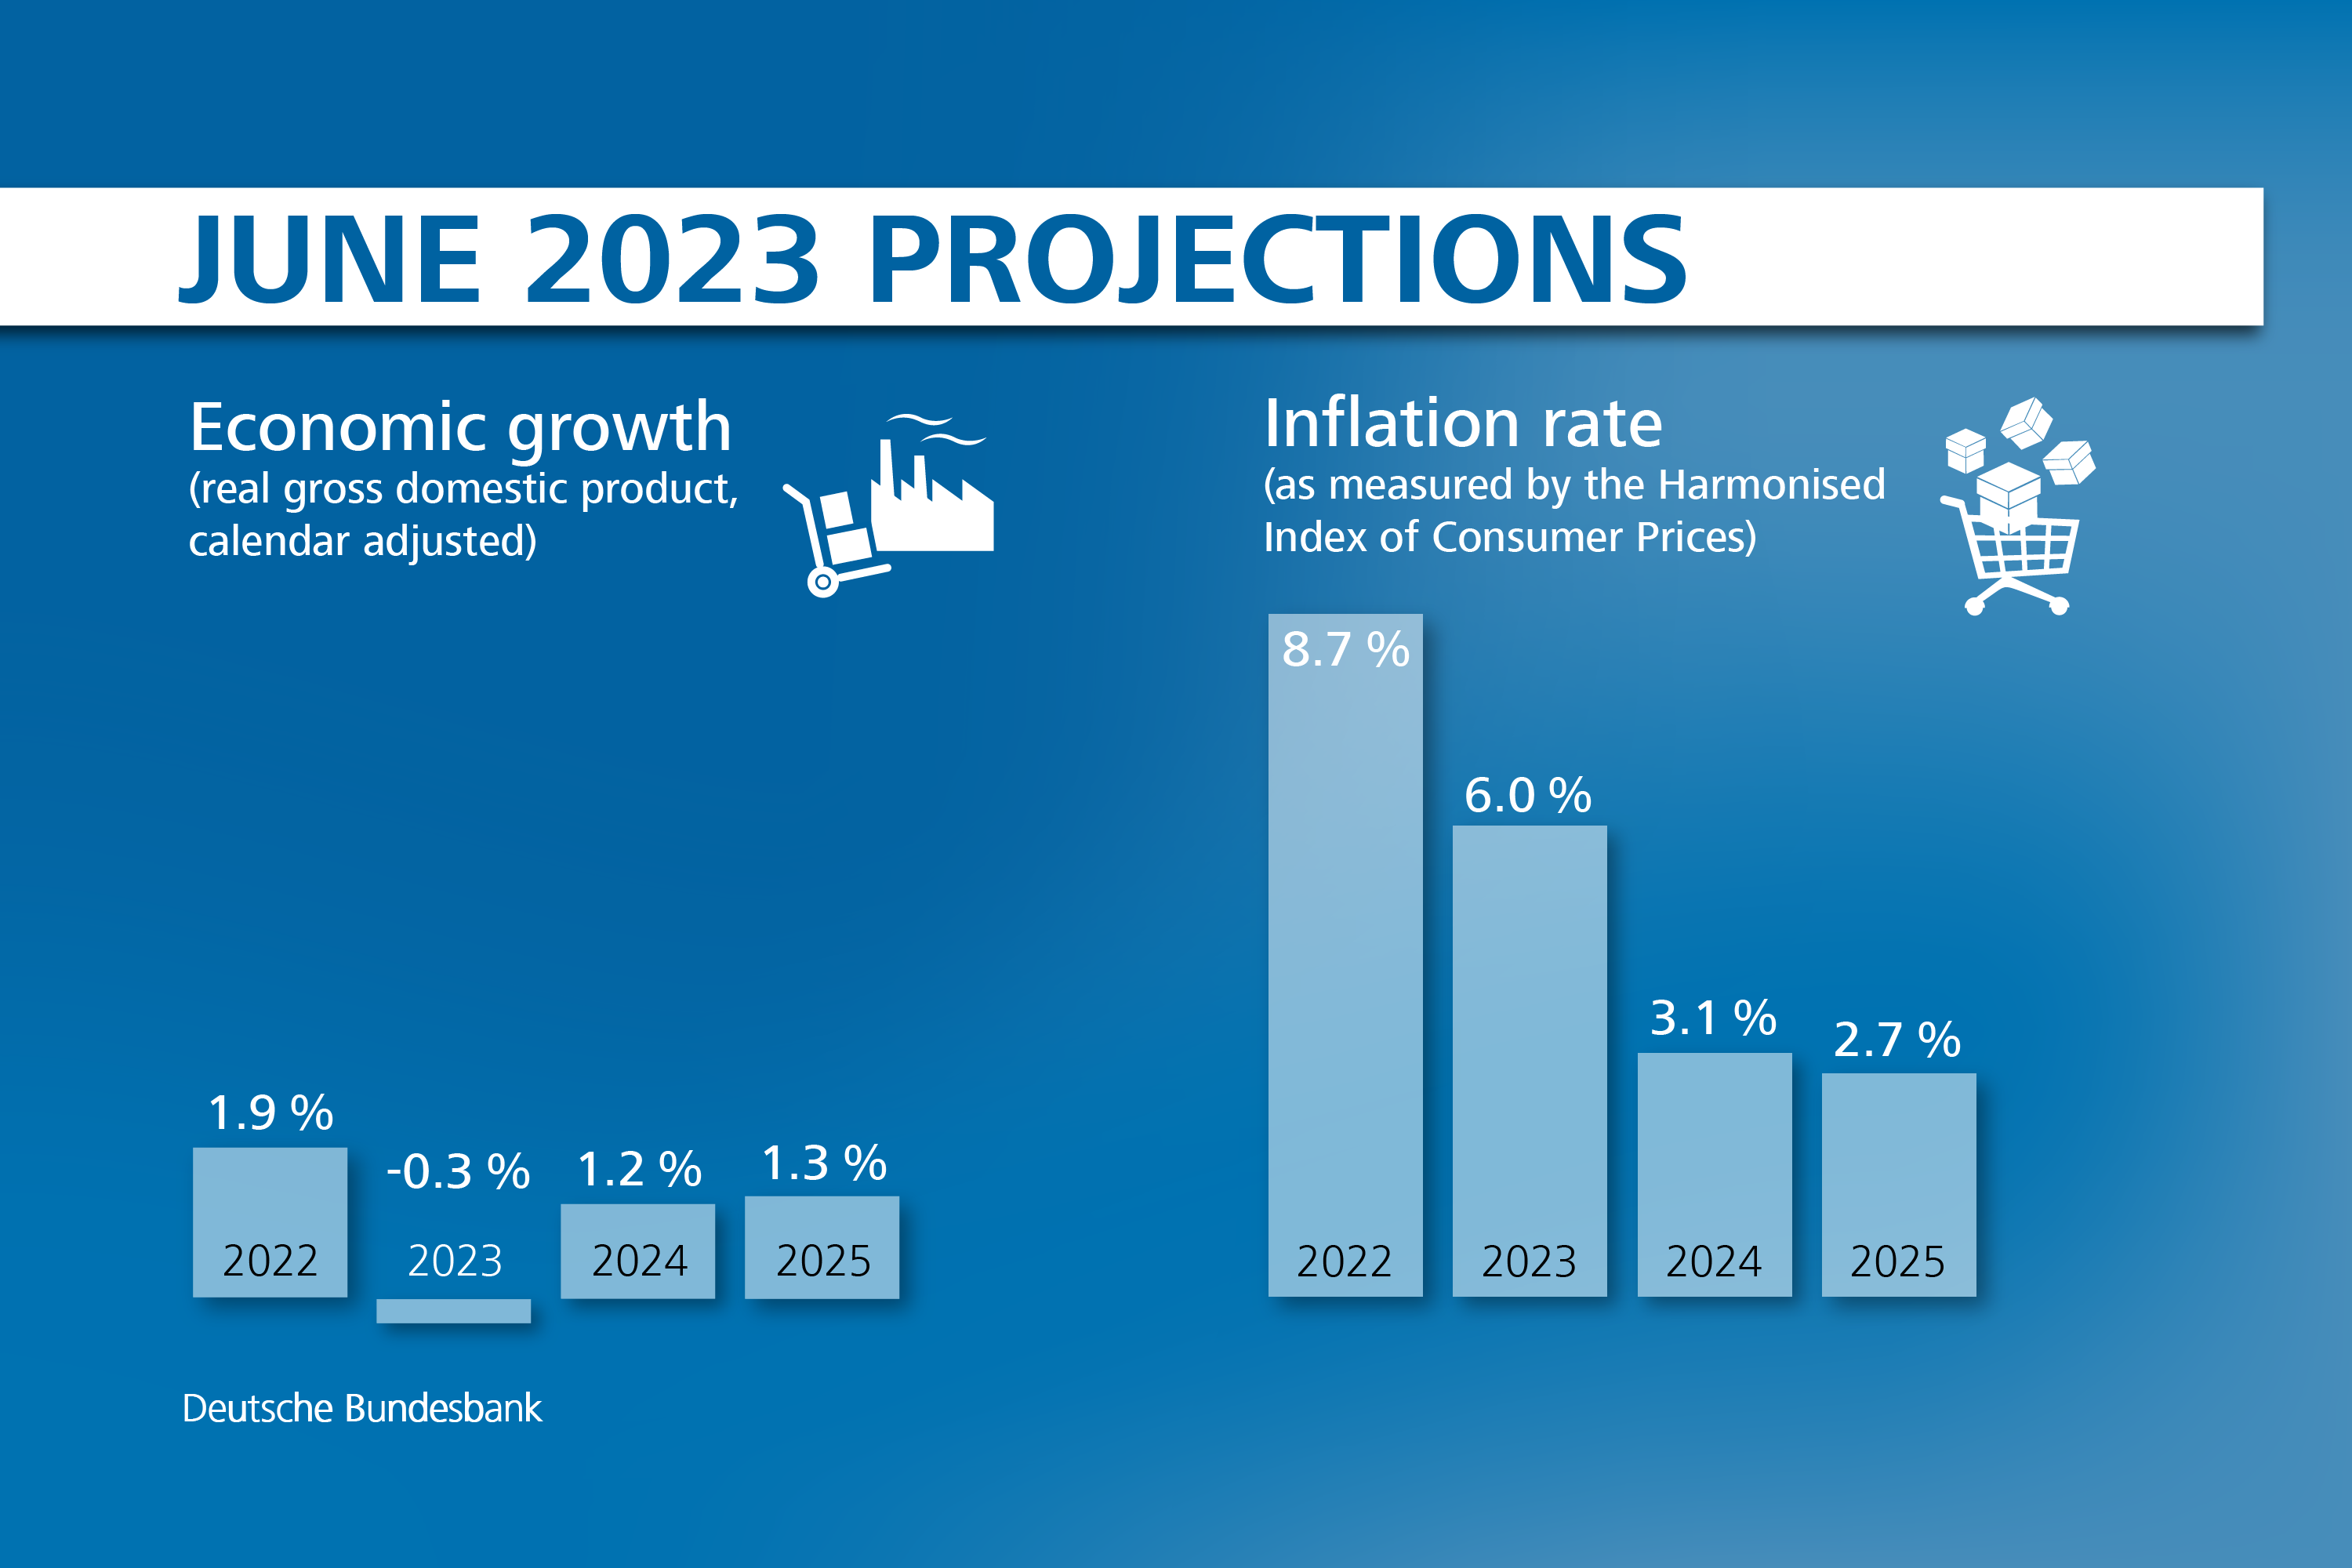 June 2023 projections